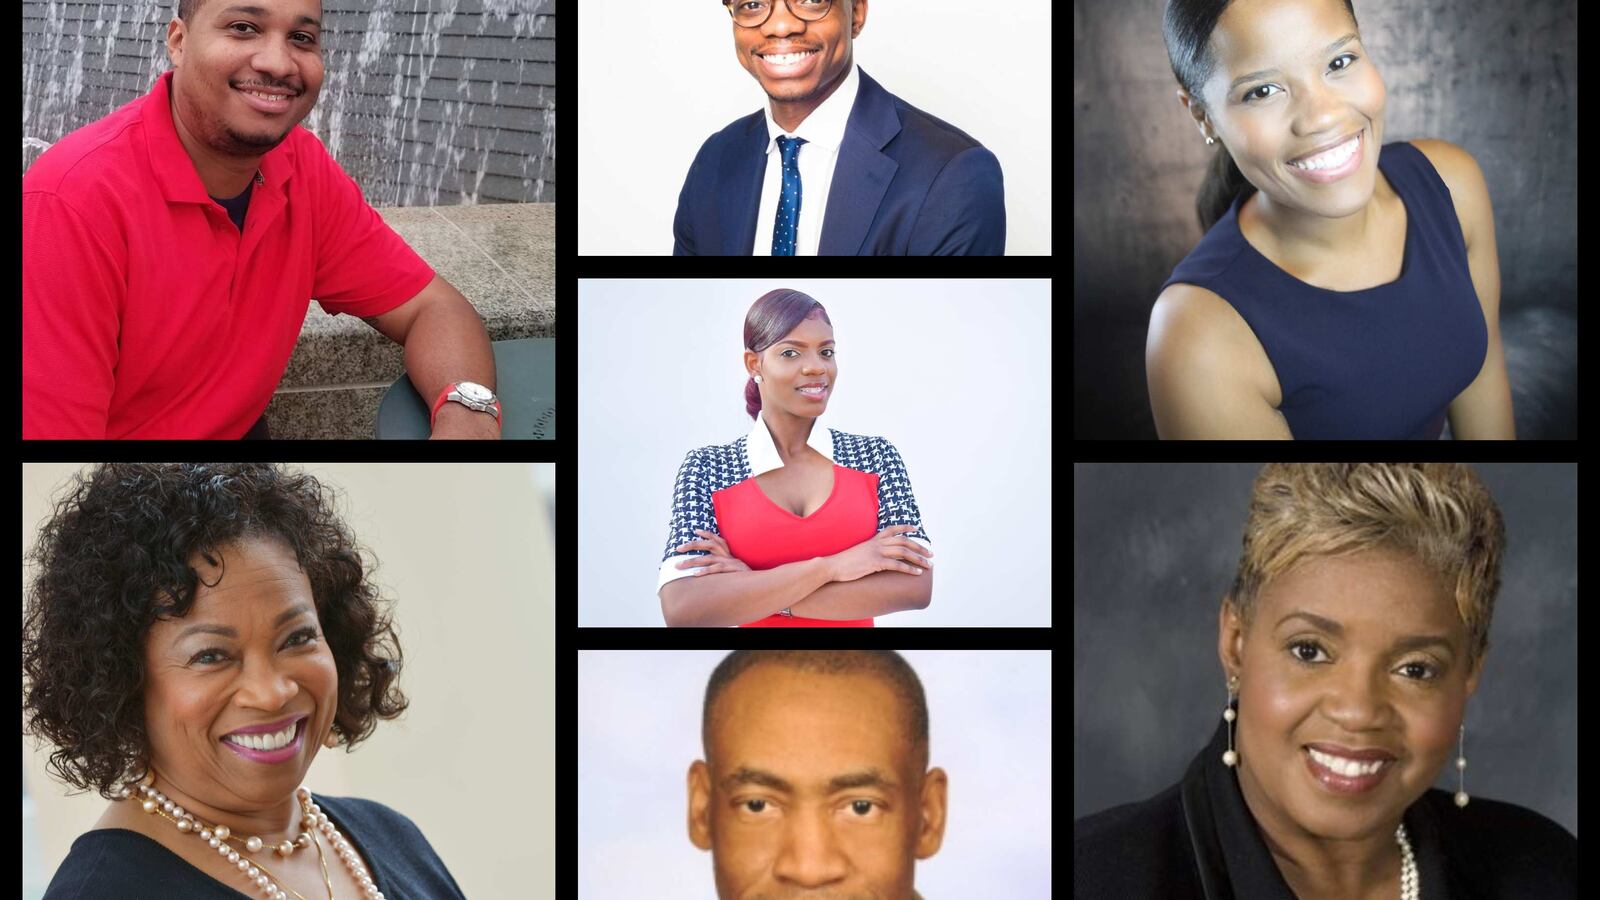 Nine candidates are vying for two seats on Detroit's school board in November. Seven submitted photos.